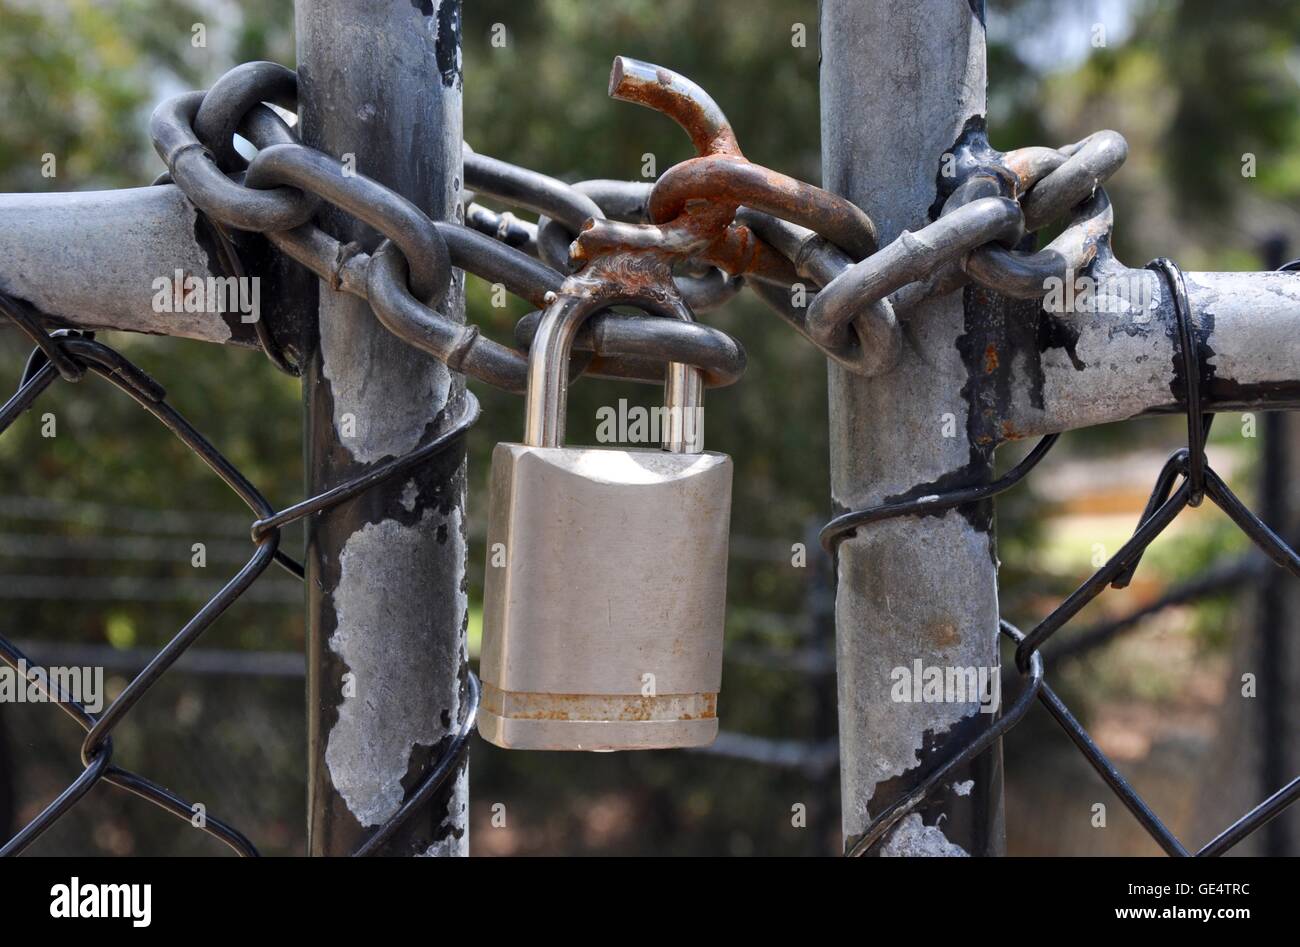 Closeup of worn metal gate closure with chain link fencing and chain link with metal padlock. Stock Photo